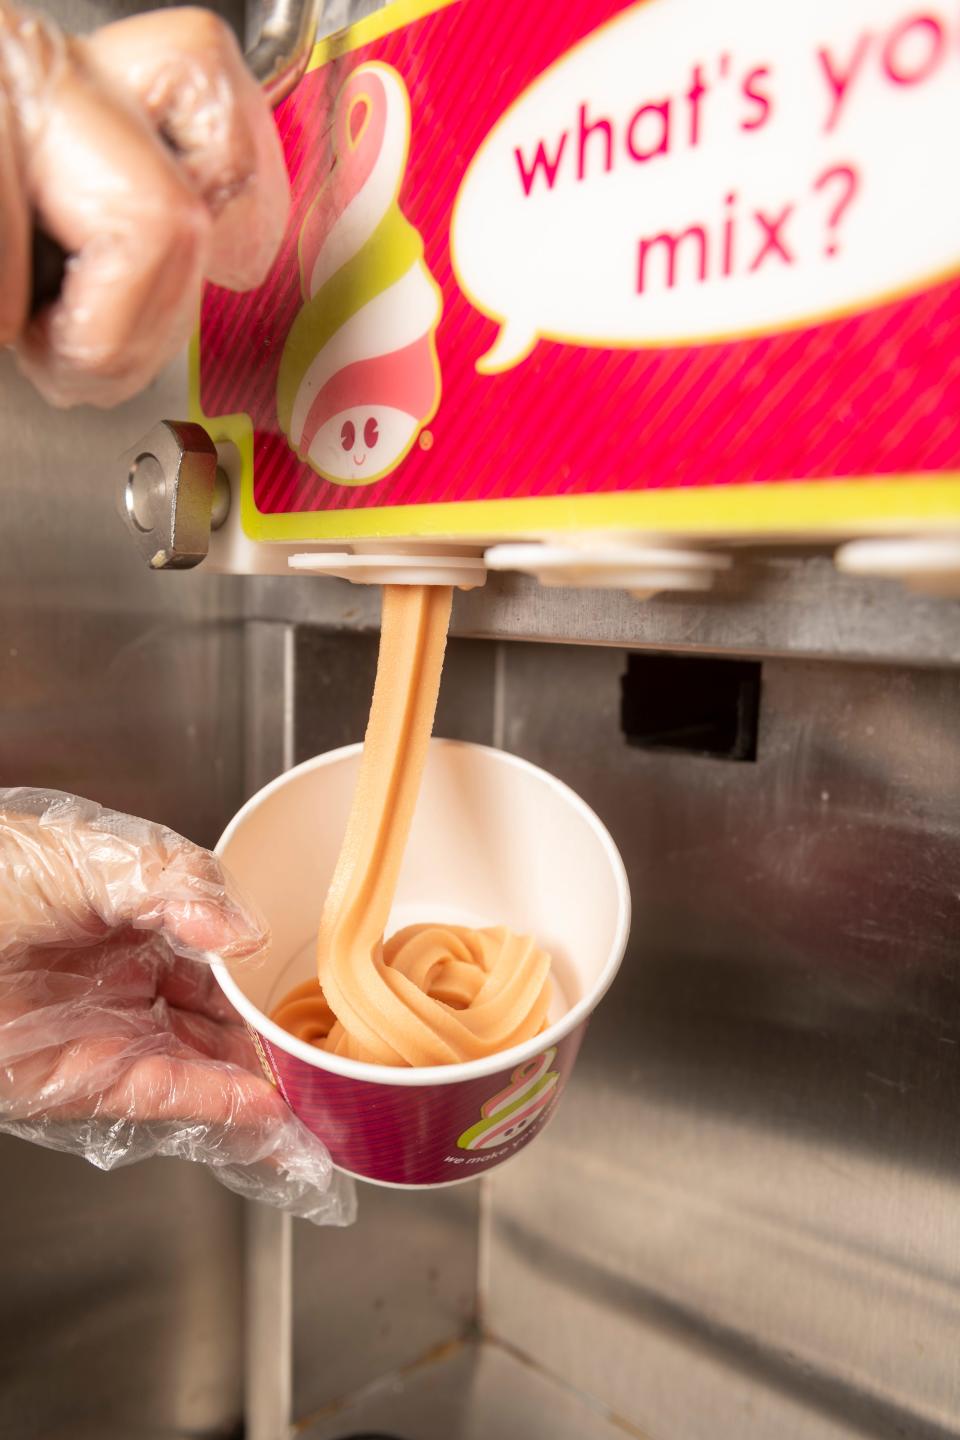 It's all self-serve when it comes to selecting one or more of the 14 flavors of frozen yogurt and more than 40 topping options at Menchie's Frozen Yogurt in Hesperia.